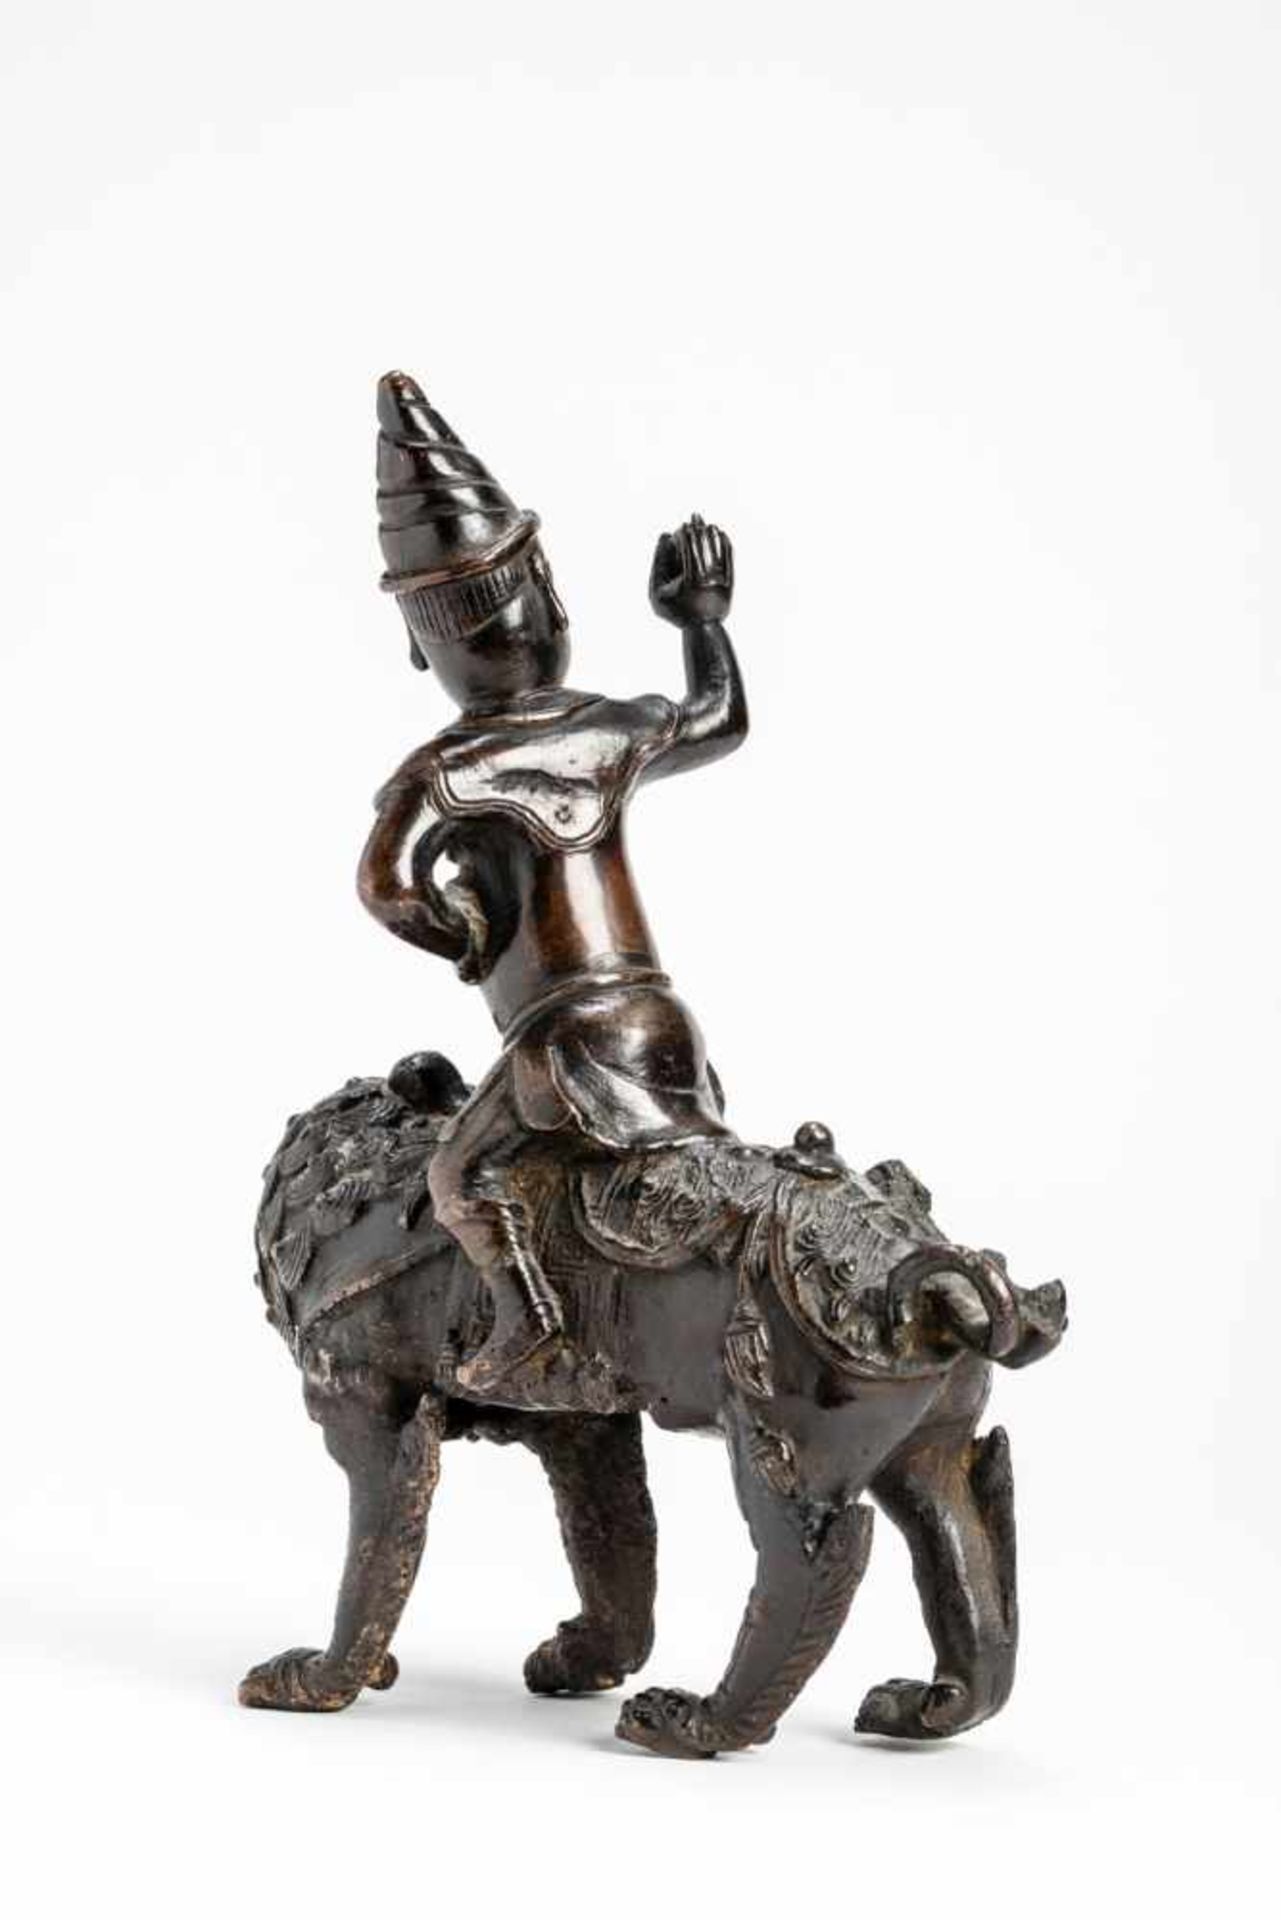 A BRONZE GUARDIAN DEITY RIDING ON A LION - Image 3 of 7